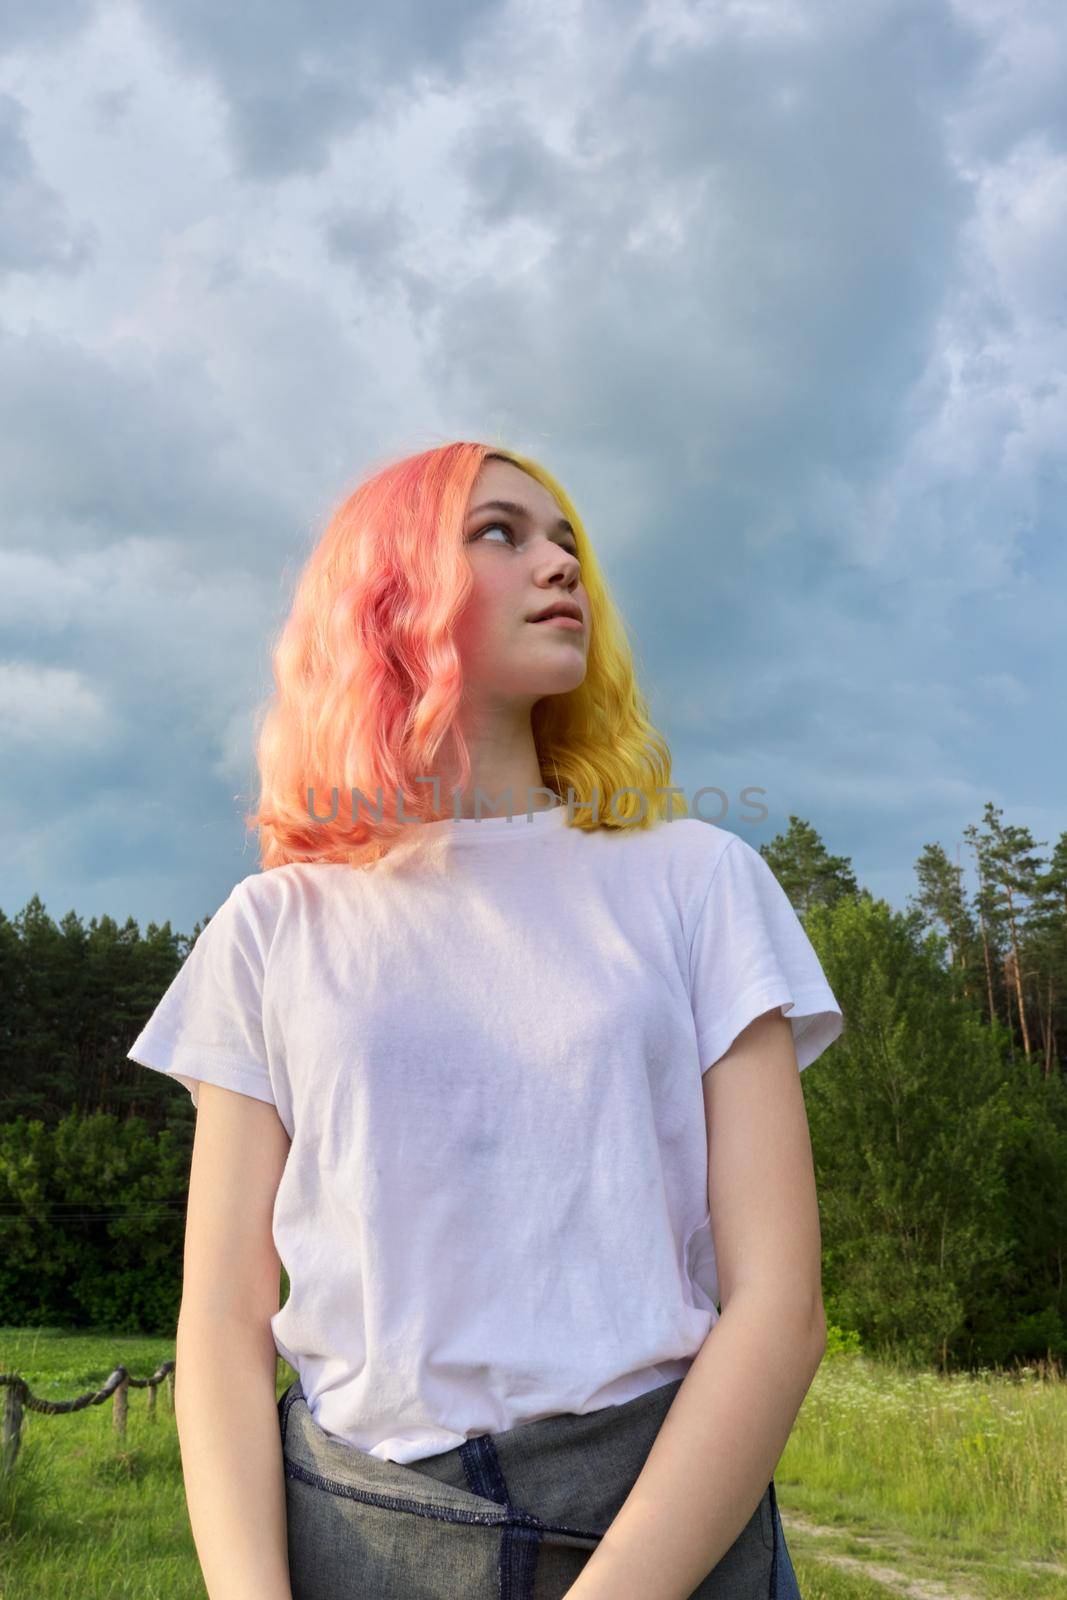 Portrait of a teenage girl hipster 15, 16 years old with dyed hair, dramatic sky nature background